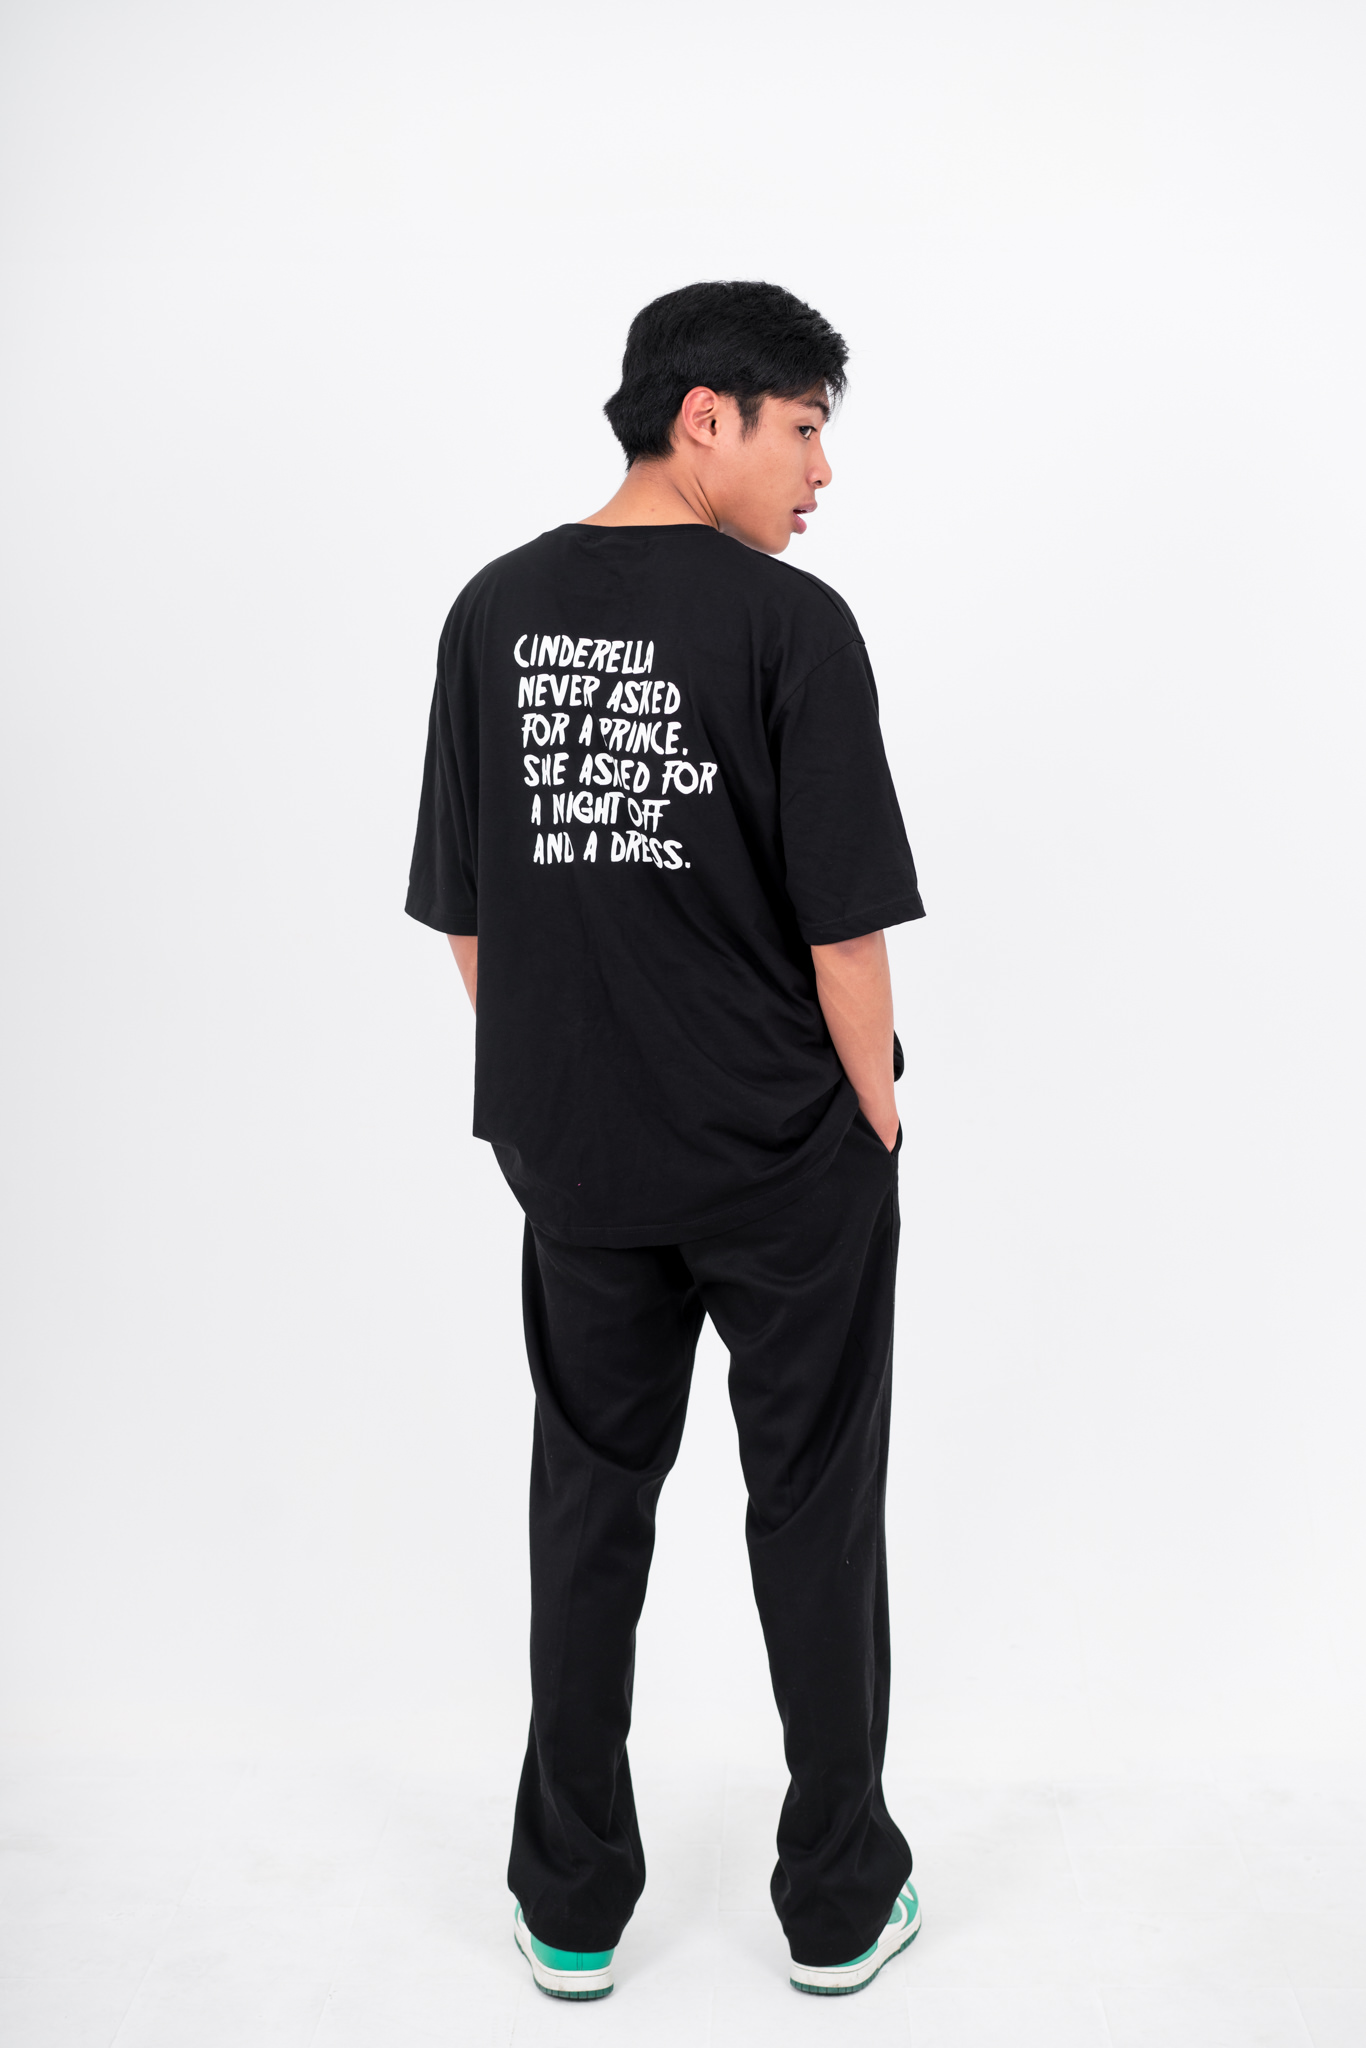 T-shirt Apparel Clothing and - Oversized 12 Cinderella